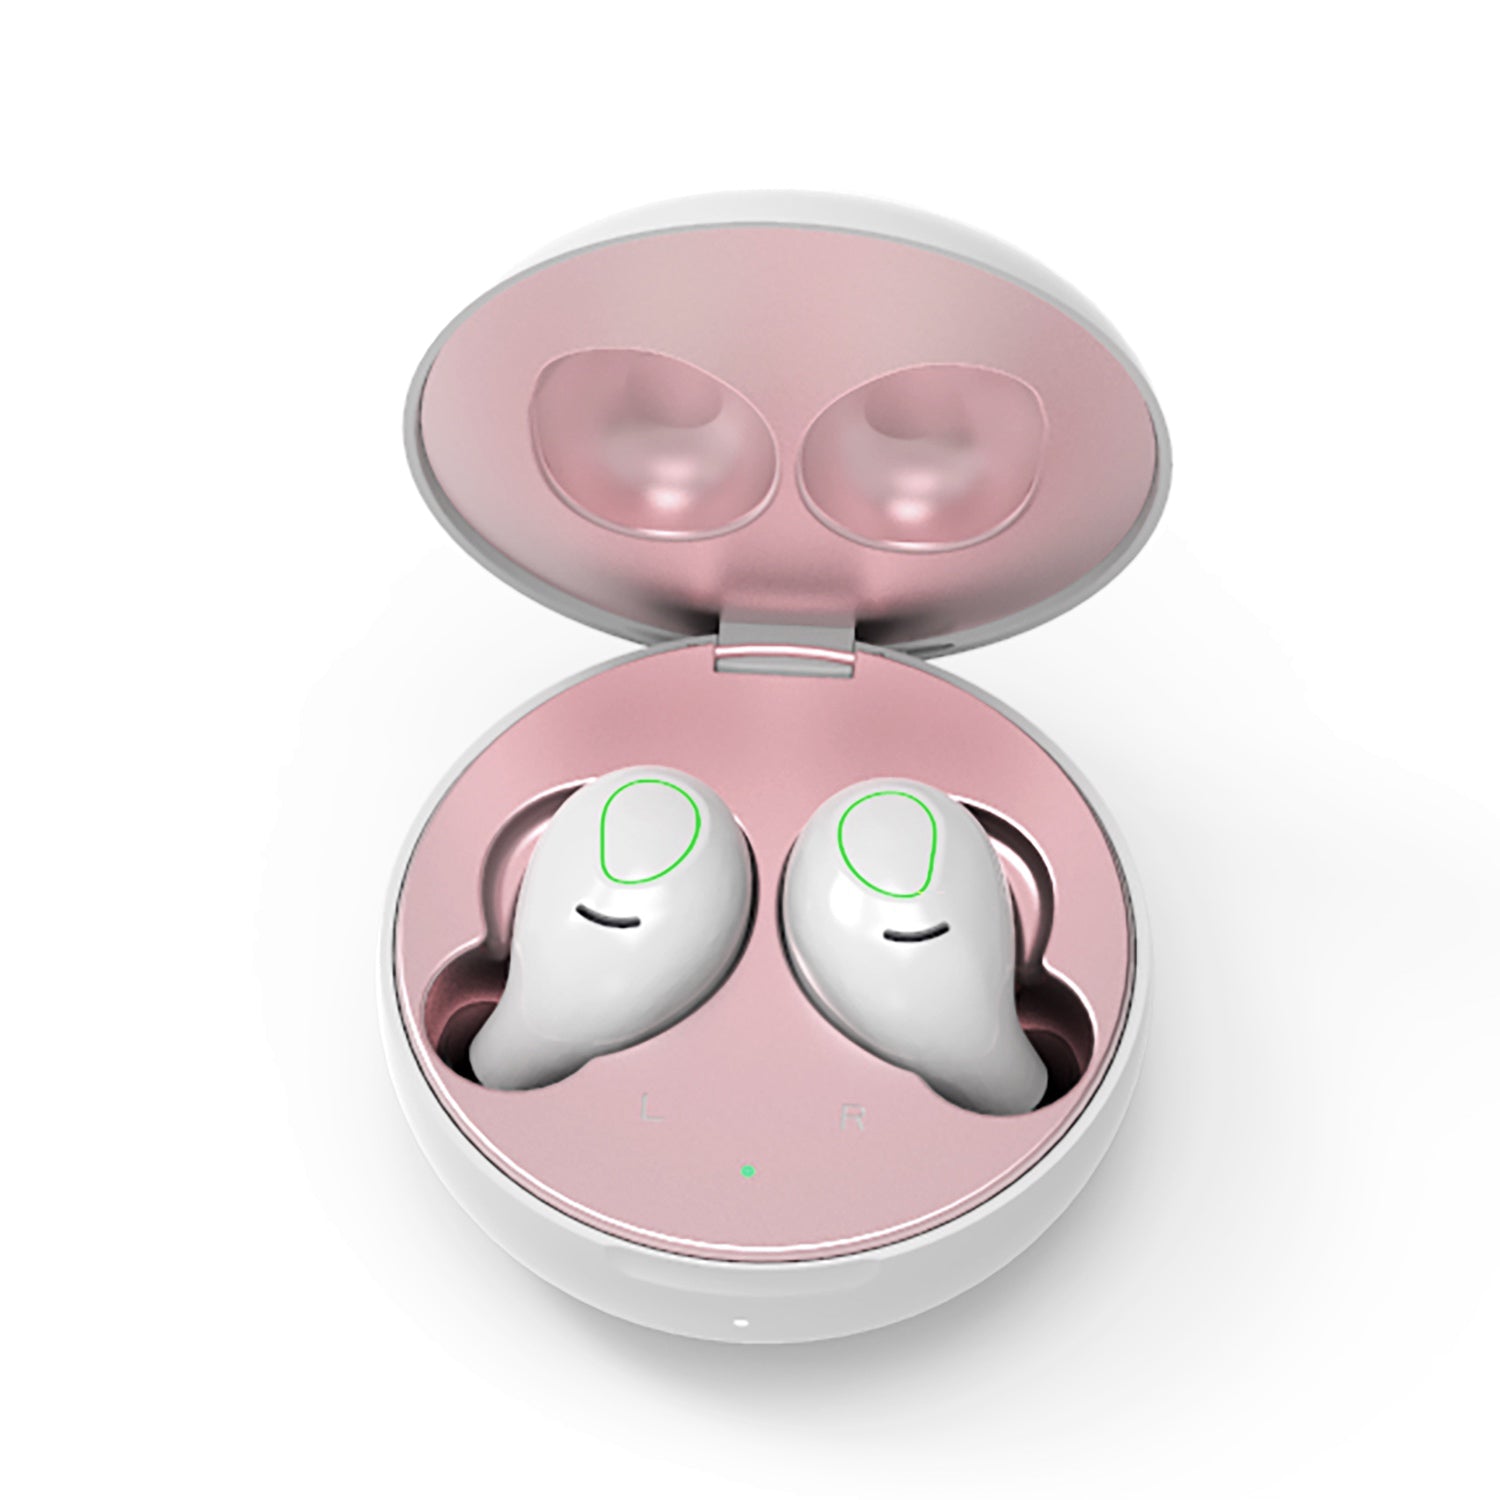 AIR ZEN 2.0 Pearl White and Rose Gold Earbuds (In Ear Wireless Headphones)